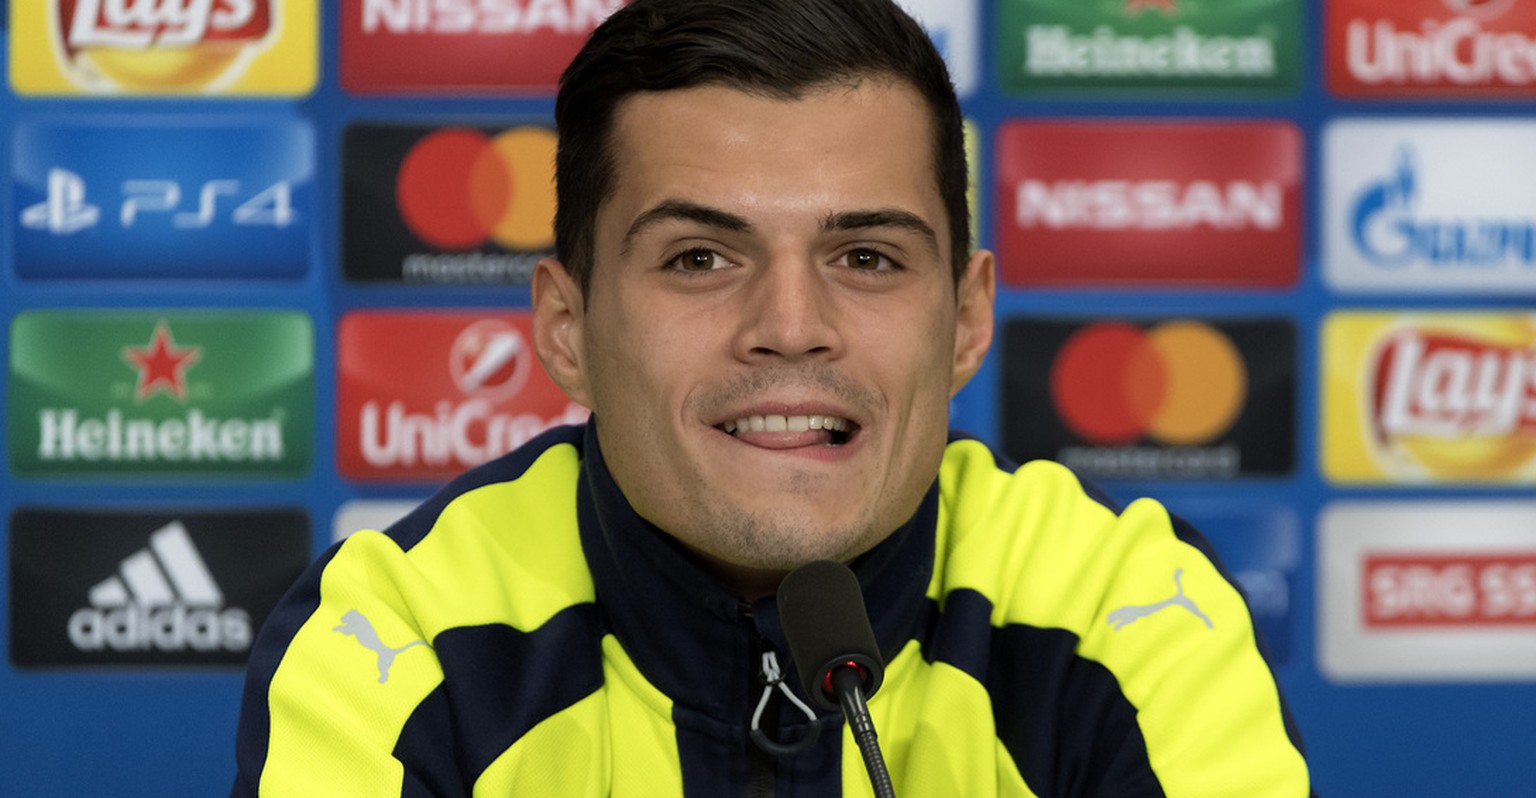 Granit Xhaka of England&#039;s Arsenal FC smiles during a press conference in the St. Jakob-Park stadium in Basel, Switzerland, on Monday, December 5, 2016. England&#039;s Arsenal FC is scheduled to p ...